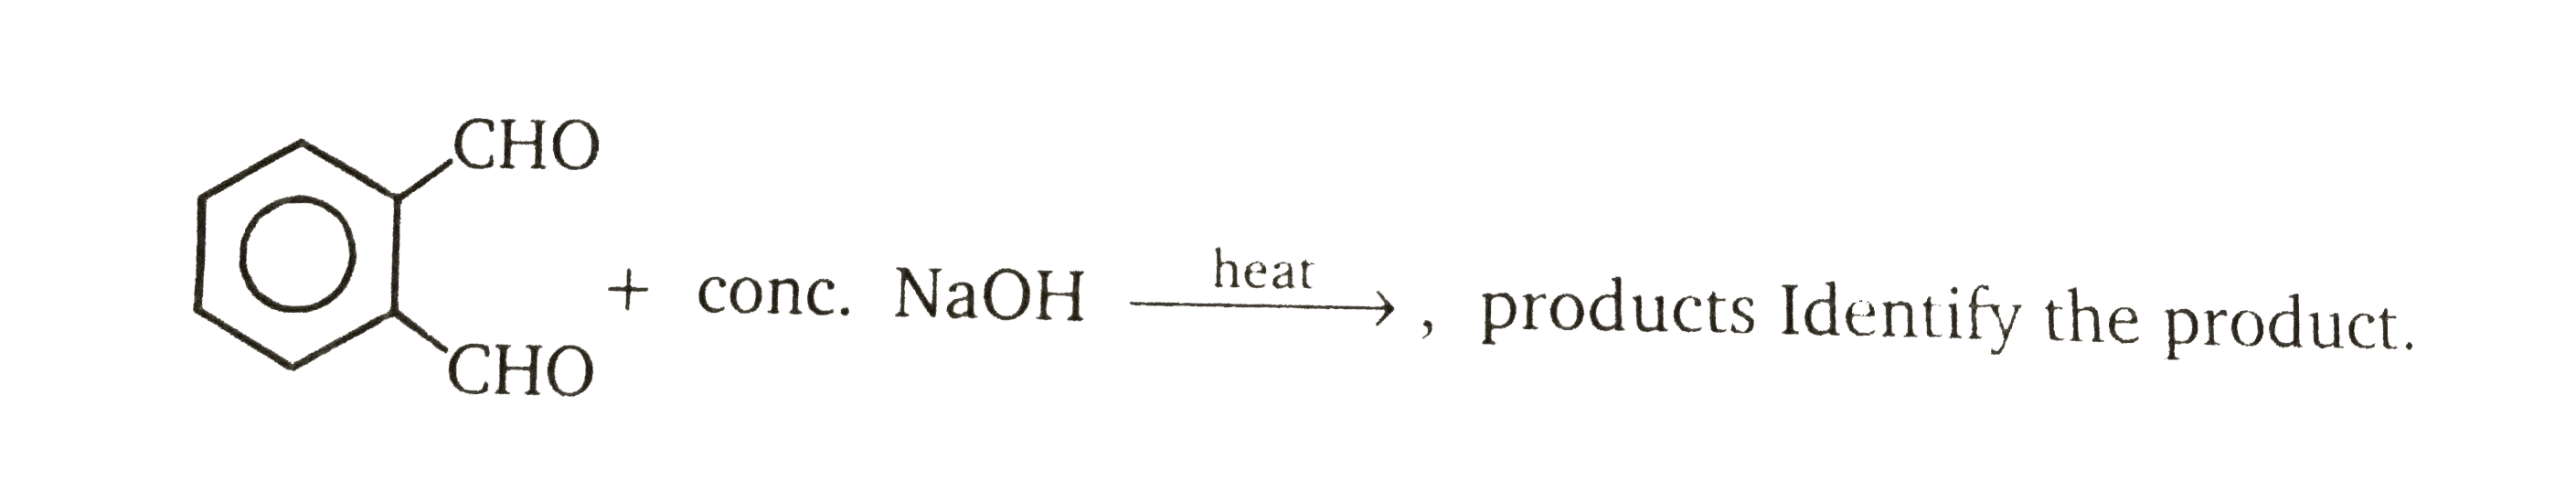 the reaction  NaOHoverset (heat)to, products identify the product.